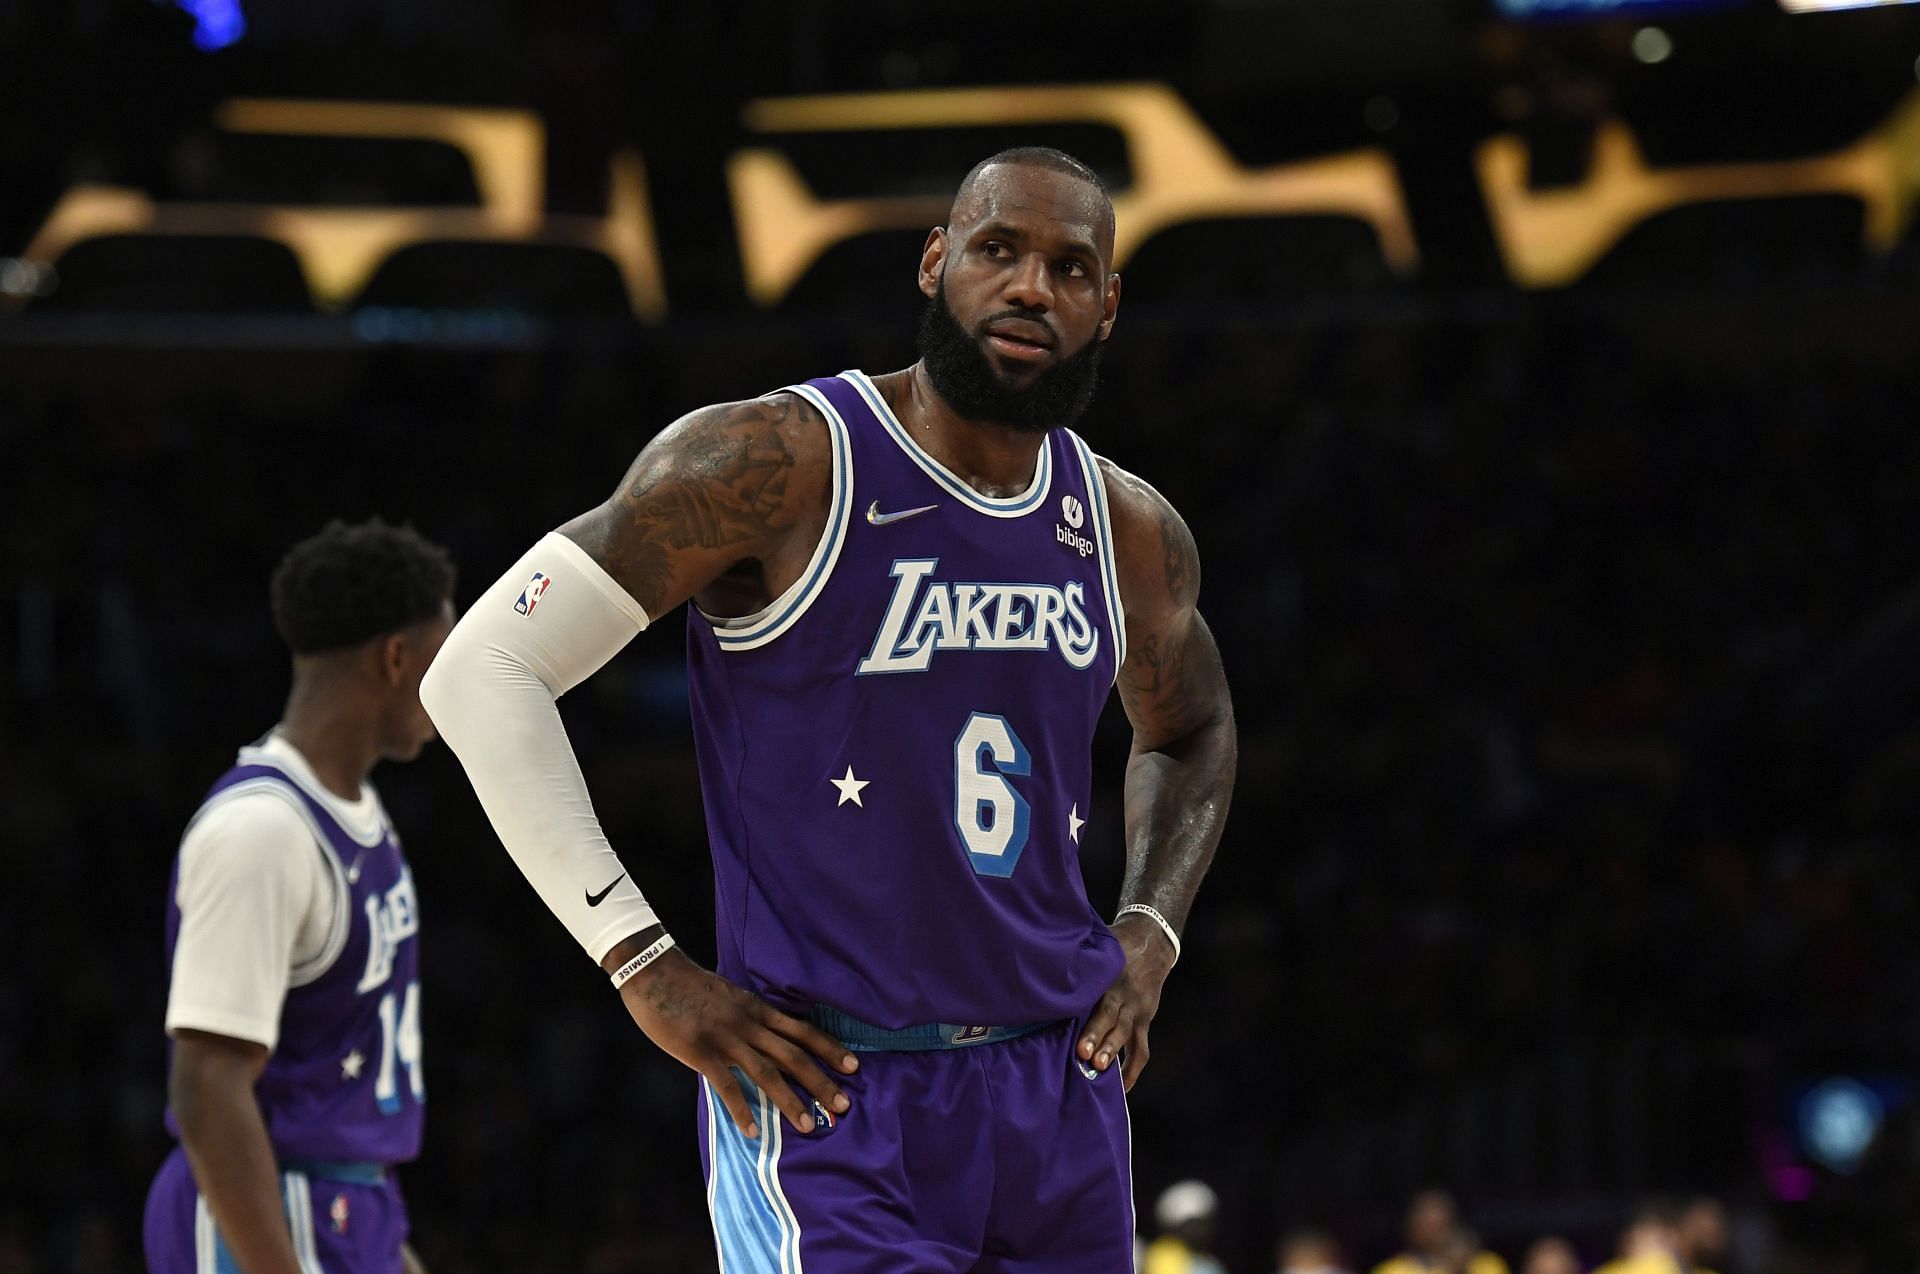 LeBron James sets Lakers on playoff run with limitless possibility